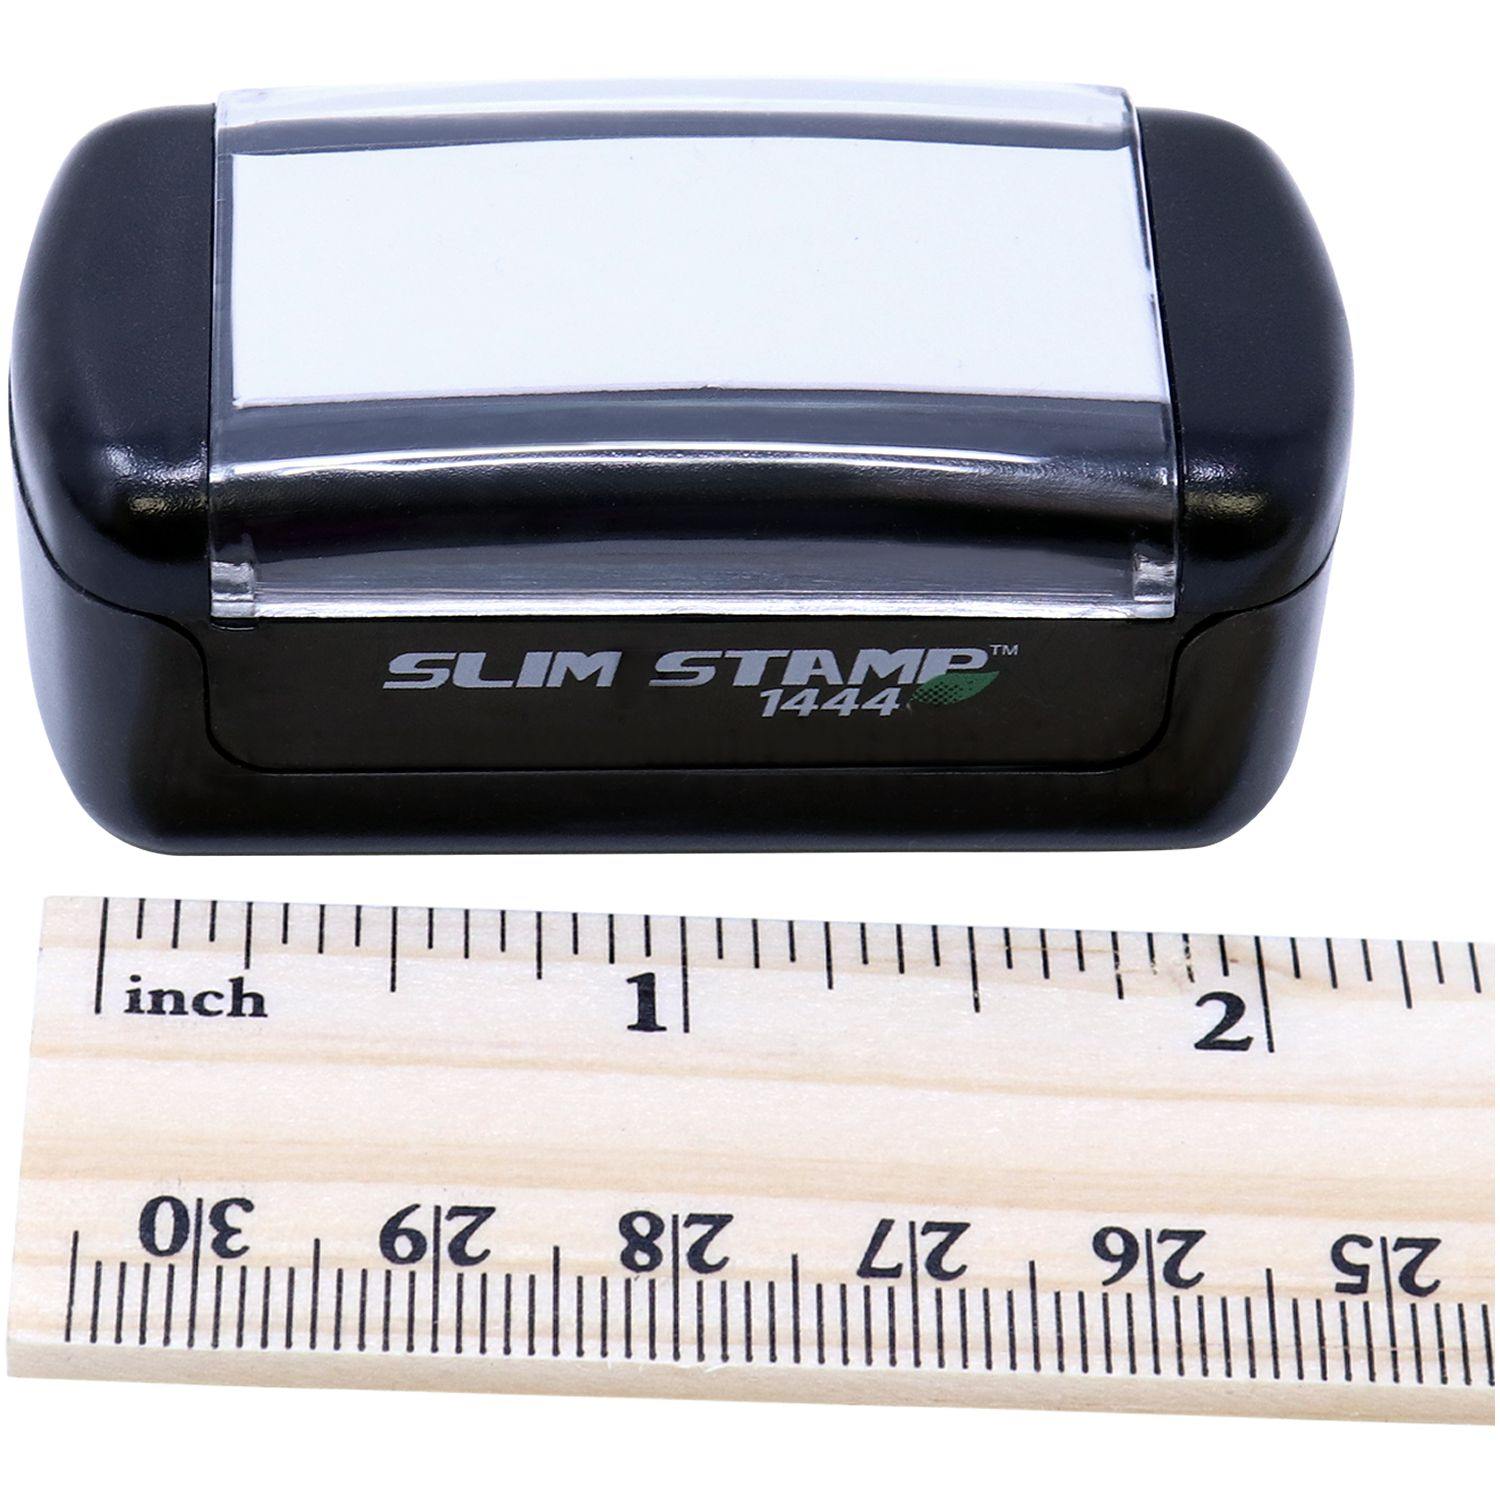 Measurement Slim Pre-Inked Narrow Font Non-Smoker Stamp with Ruler